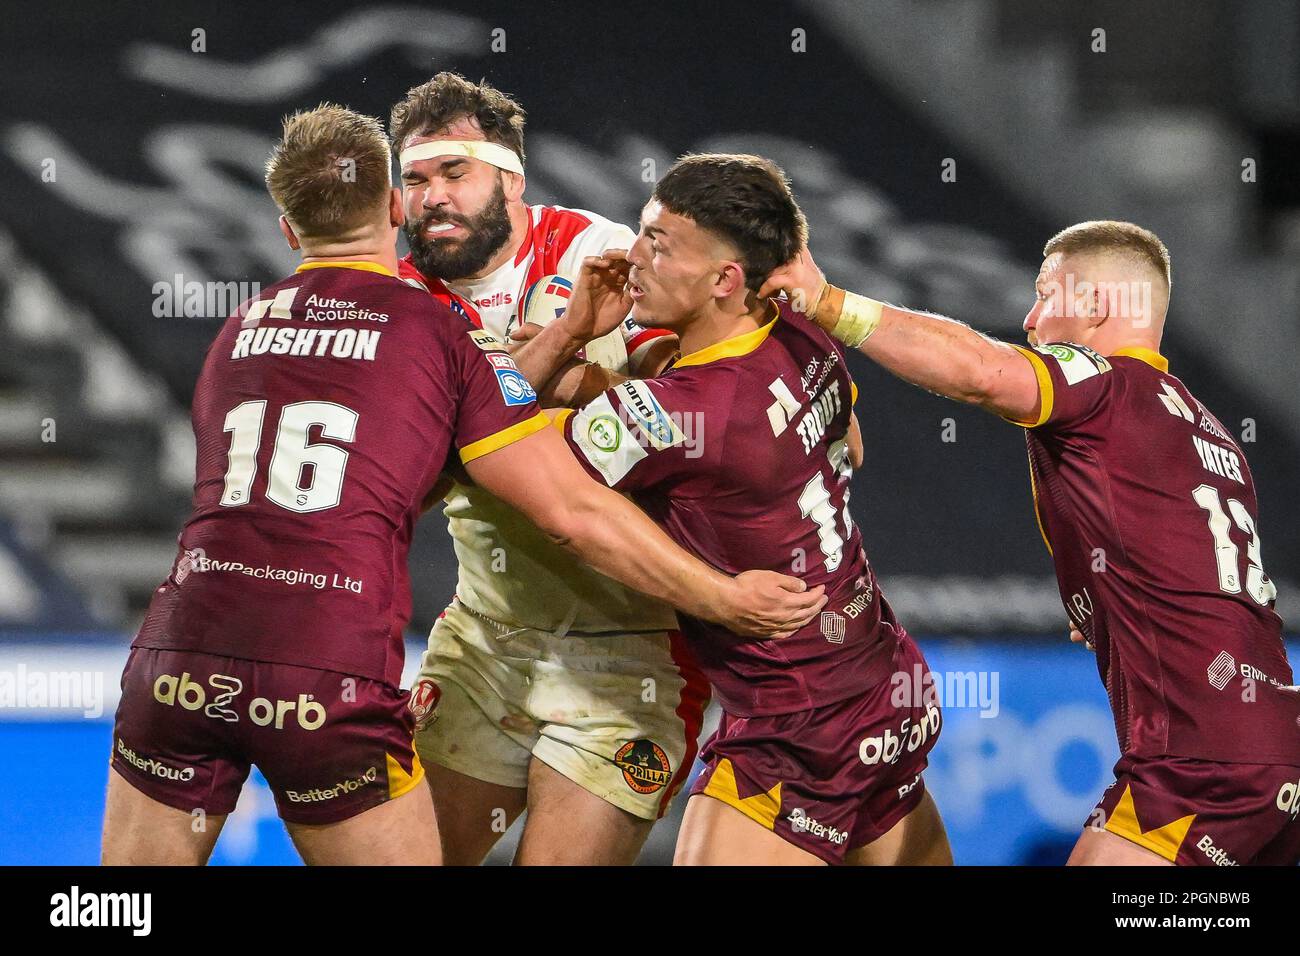 Alex Walmsley #8 of St Helens is tackled by Harry Rushton #16 and Owen Trout #17 of Huddersfield Giants during the Betfred Super League Round 6 match Huddersfield Giants vs St Helens at John Smith's Stadium, Huddersfield, United Kingdom, 23rd March 2023  (Photo by Craig Thomas/News Images) Stock Photo